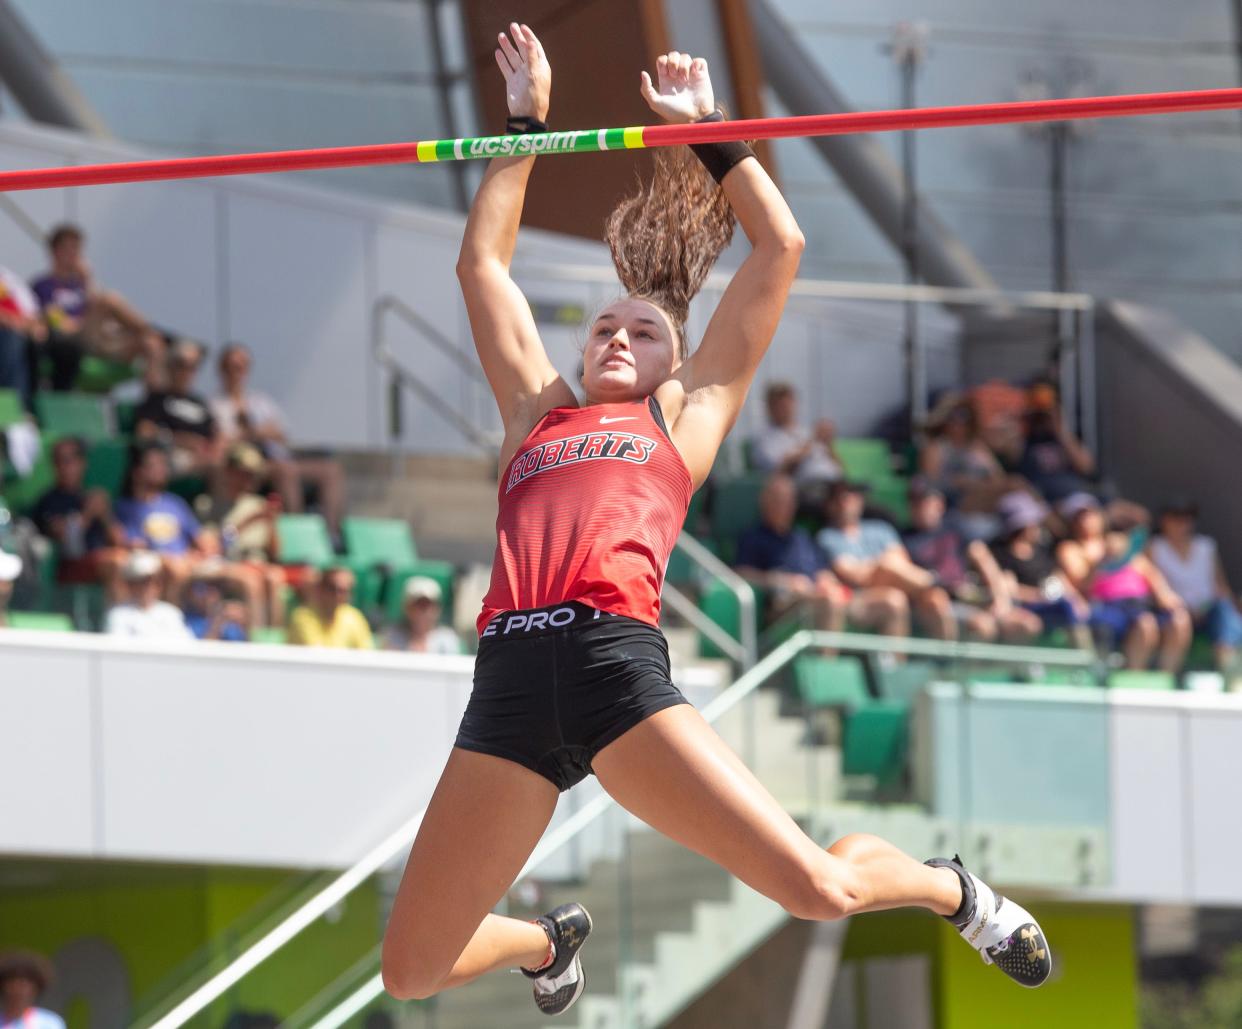 Brynn King PR’s on her way to winning bronze in the women’s pole vault on the final day of the U.S. Olympic Track & Field Trials in Eugene Sunday, June 30, 2024.